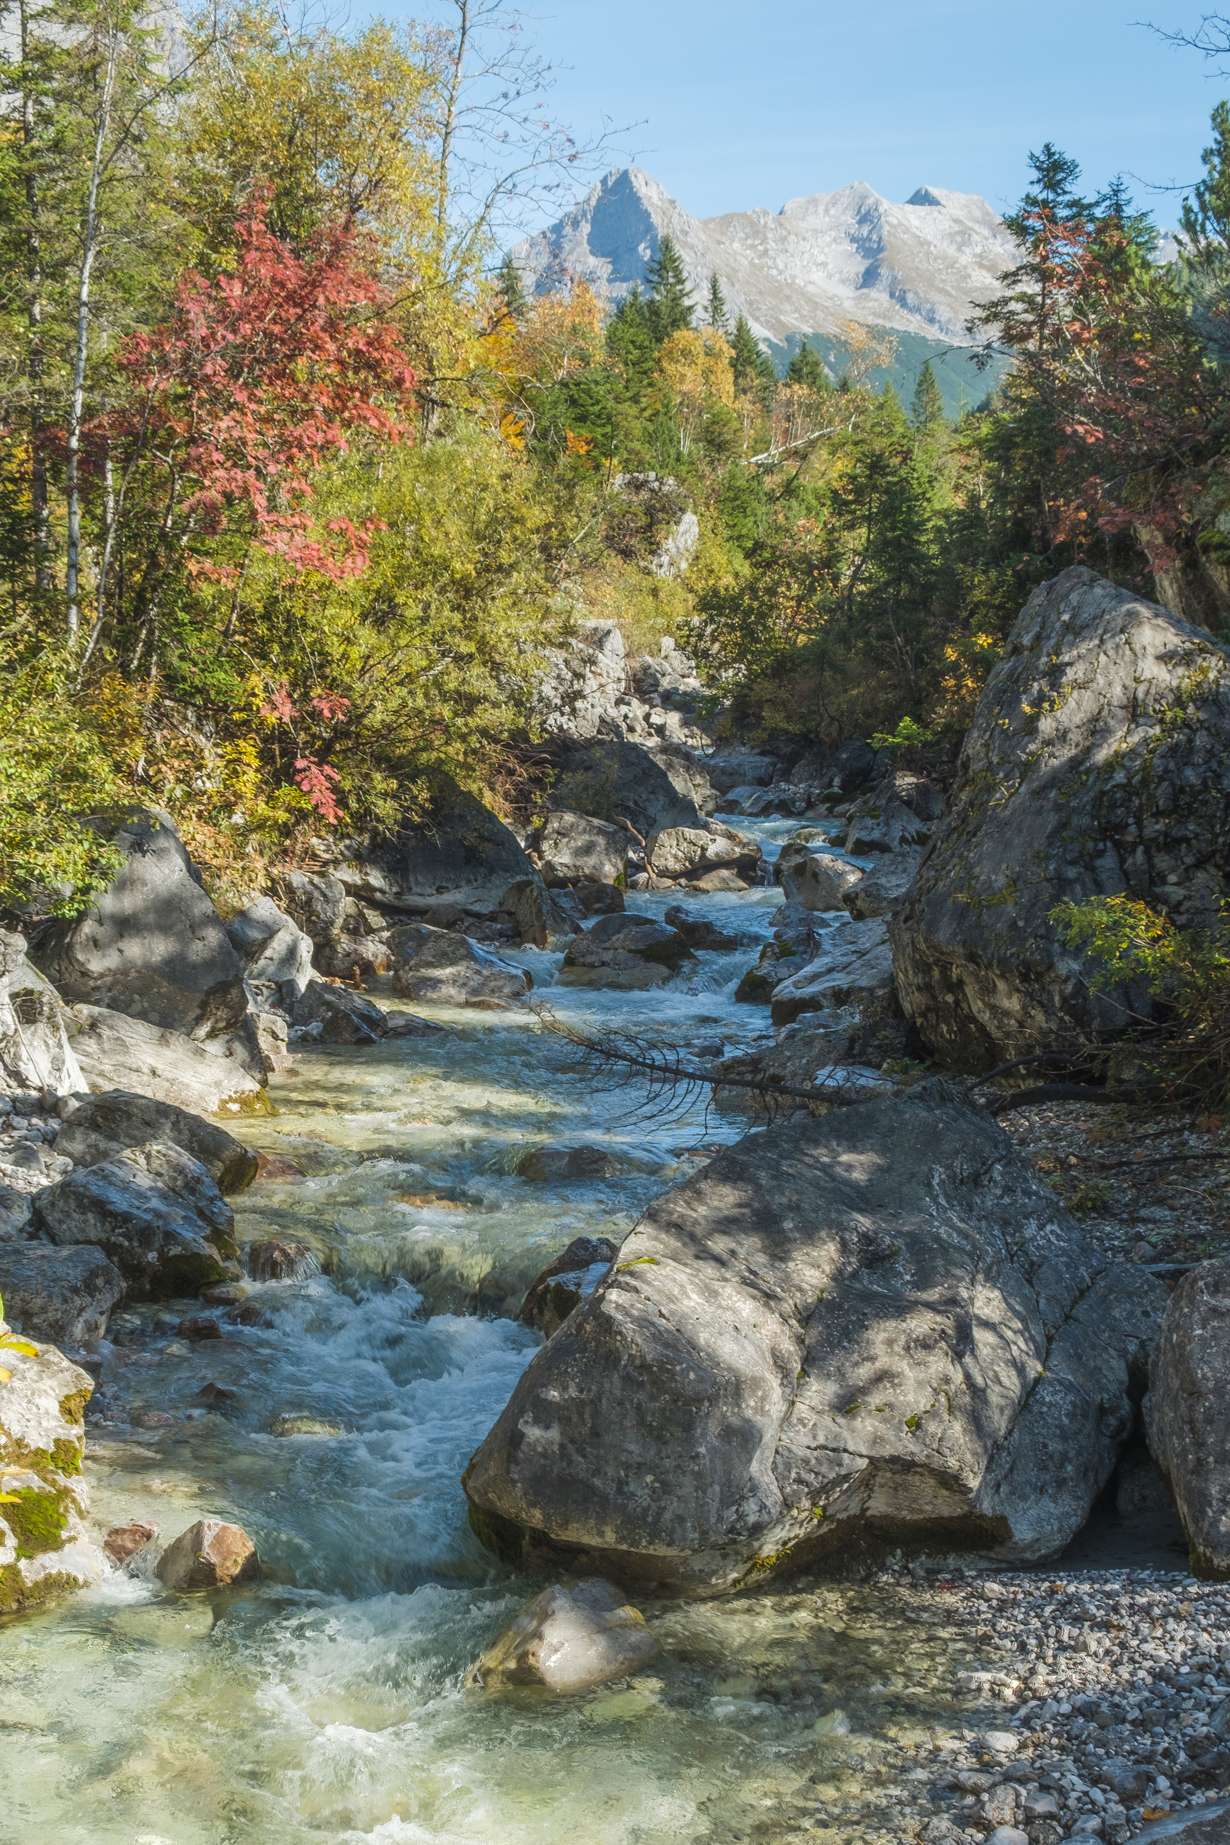 A beautiful river scene in the Karwendel leading to a mountain peak surrounding by colour red, yellow and green trees.